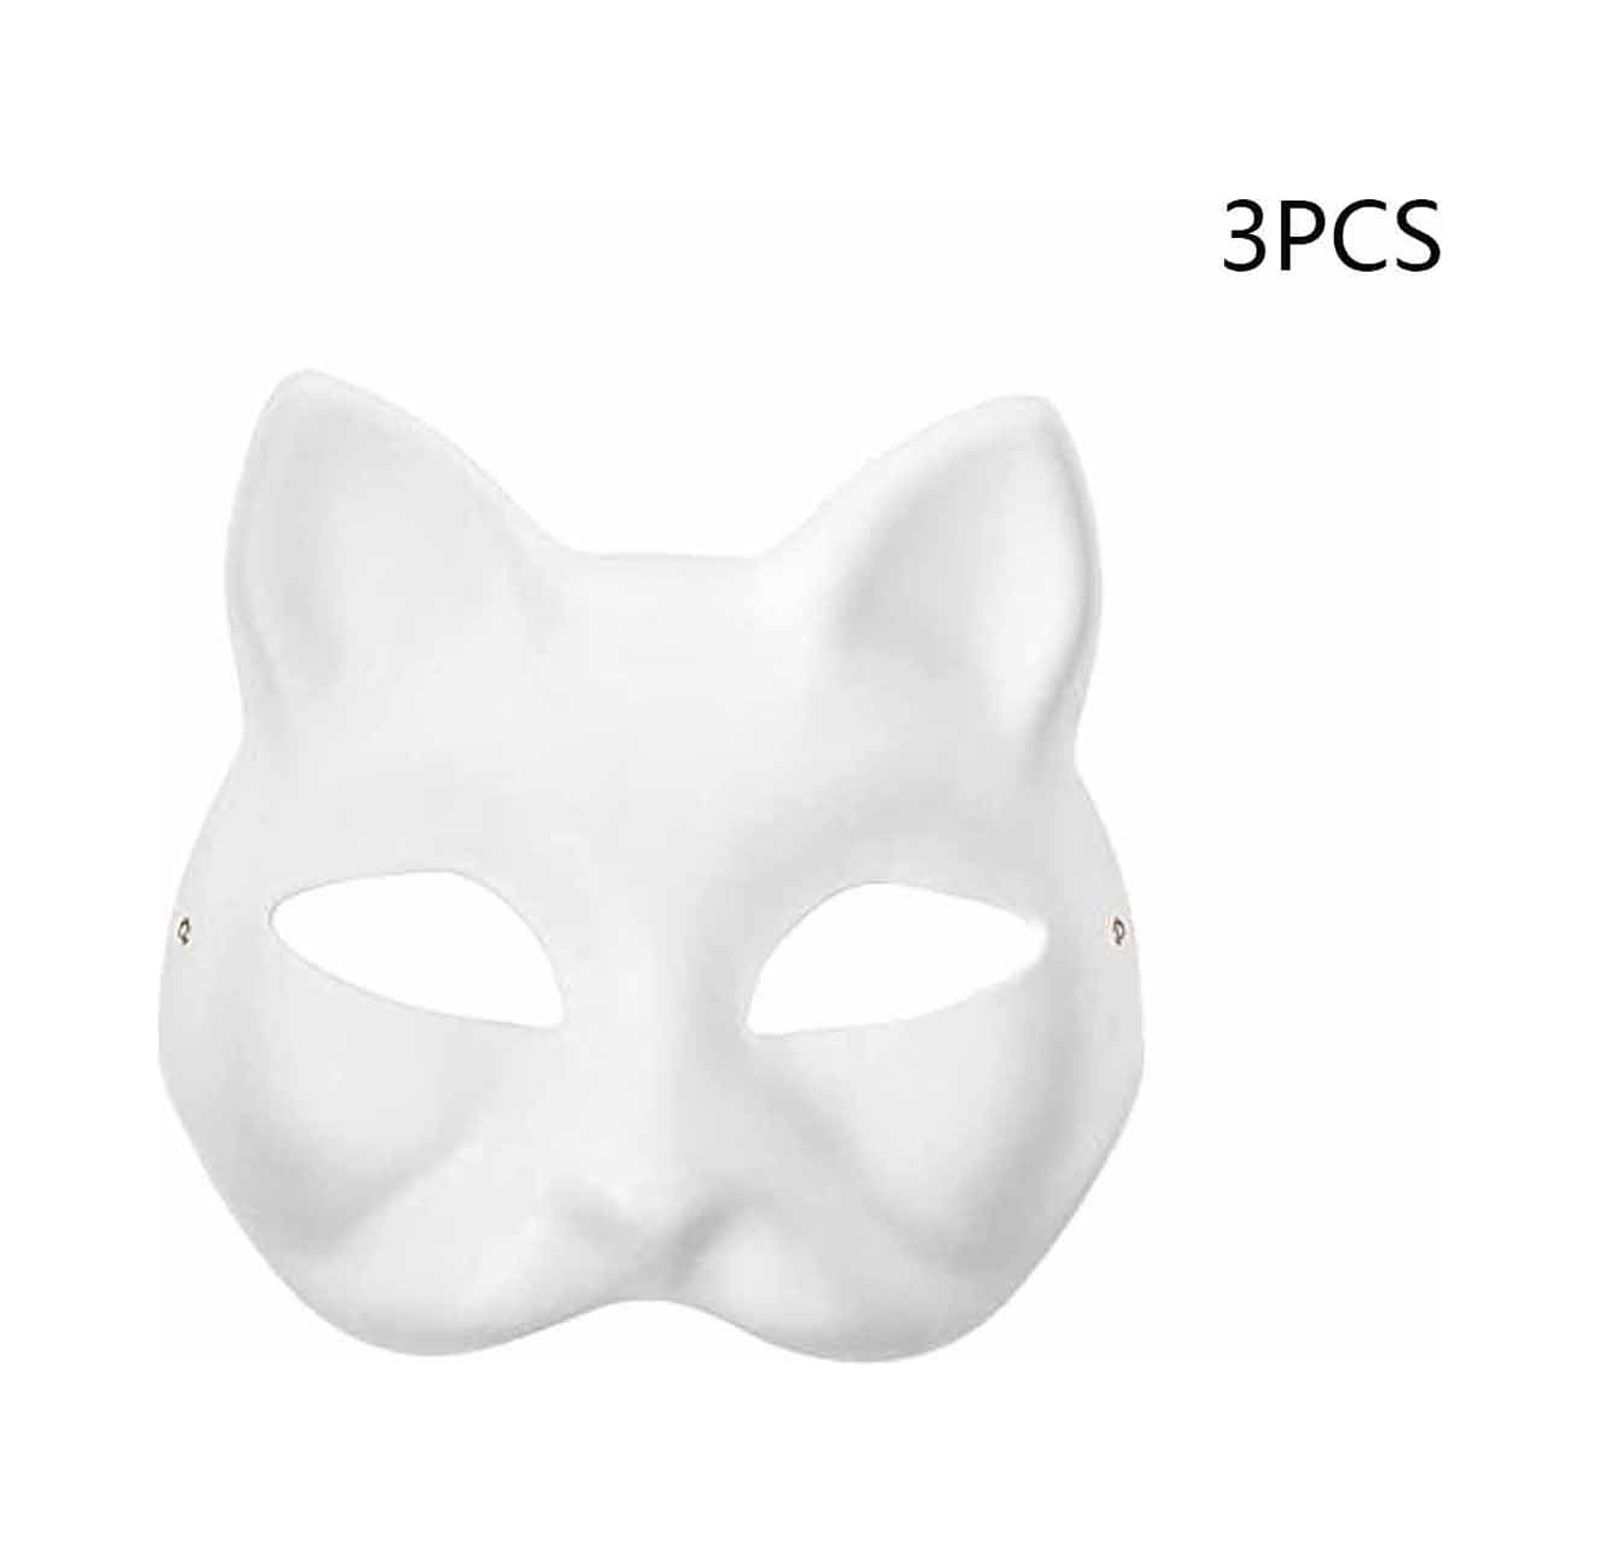 Buodes Deals Clearance Under 5 Mask DIY Painted Blank Mask White Paper ...